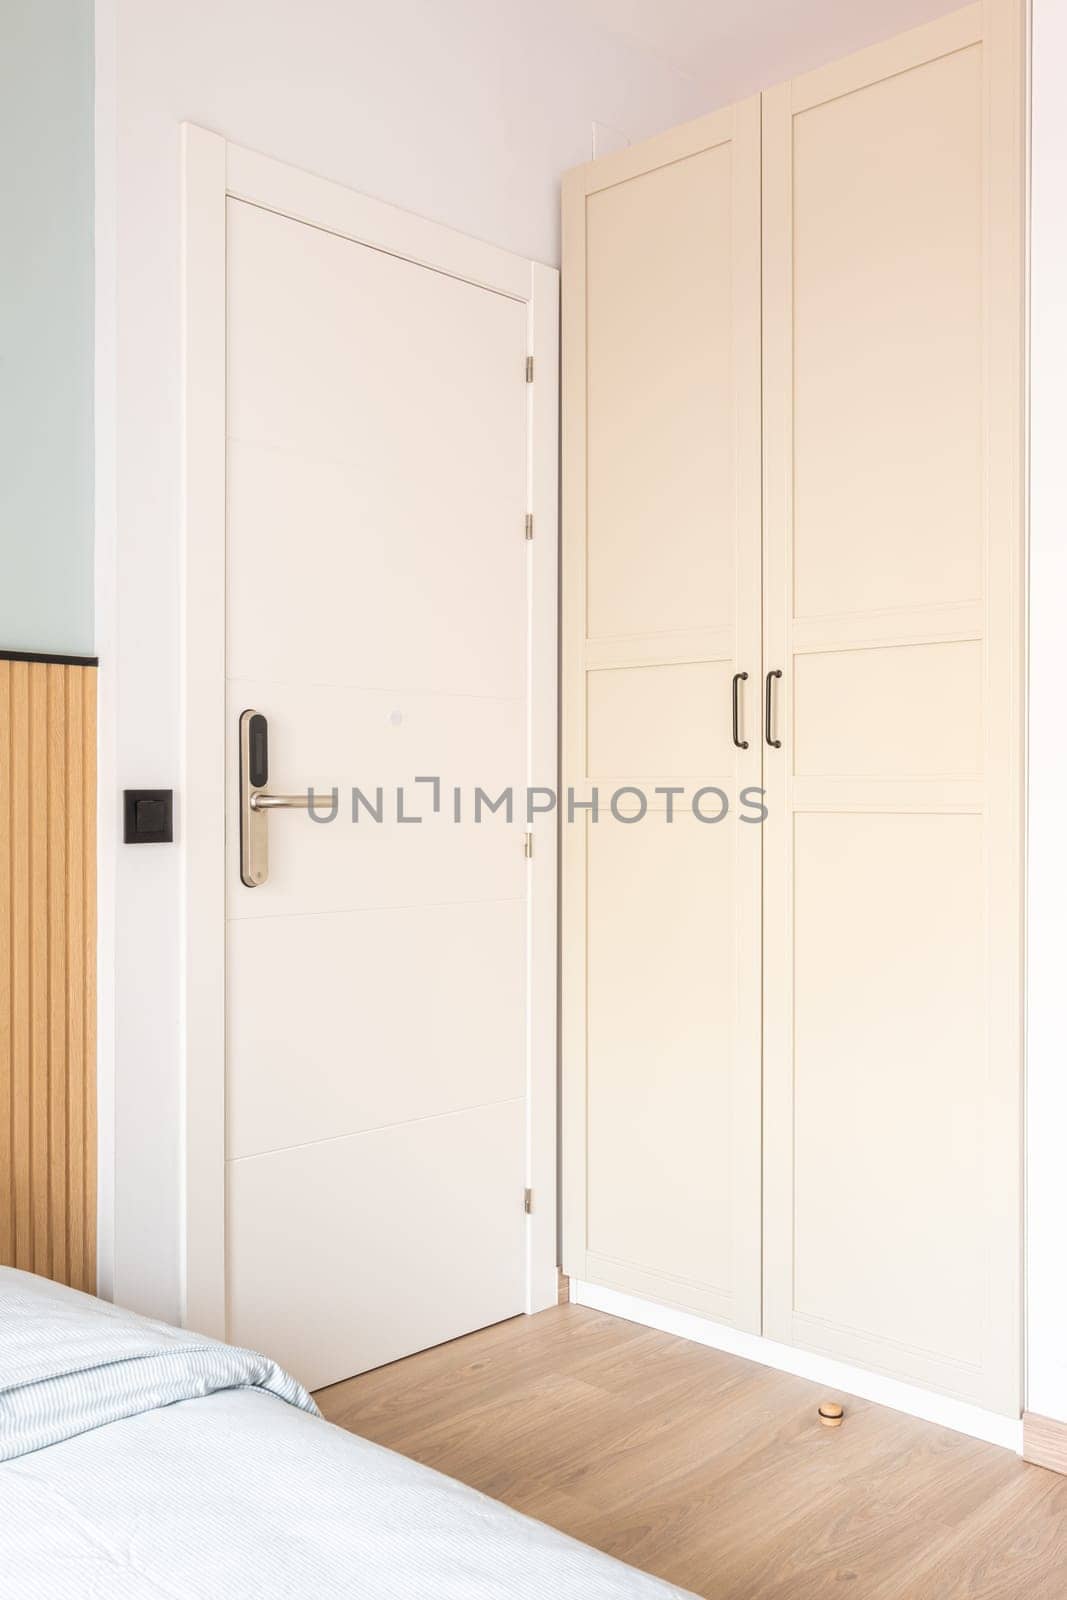 View of white front doors with electronic digital lock next to wardrobe and bed in hotel room. Concept of a modern security and protection system.